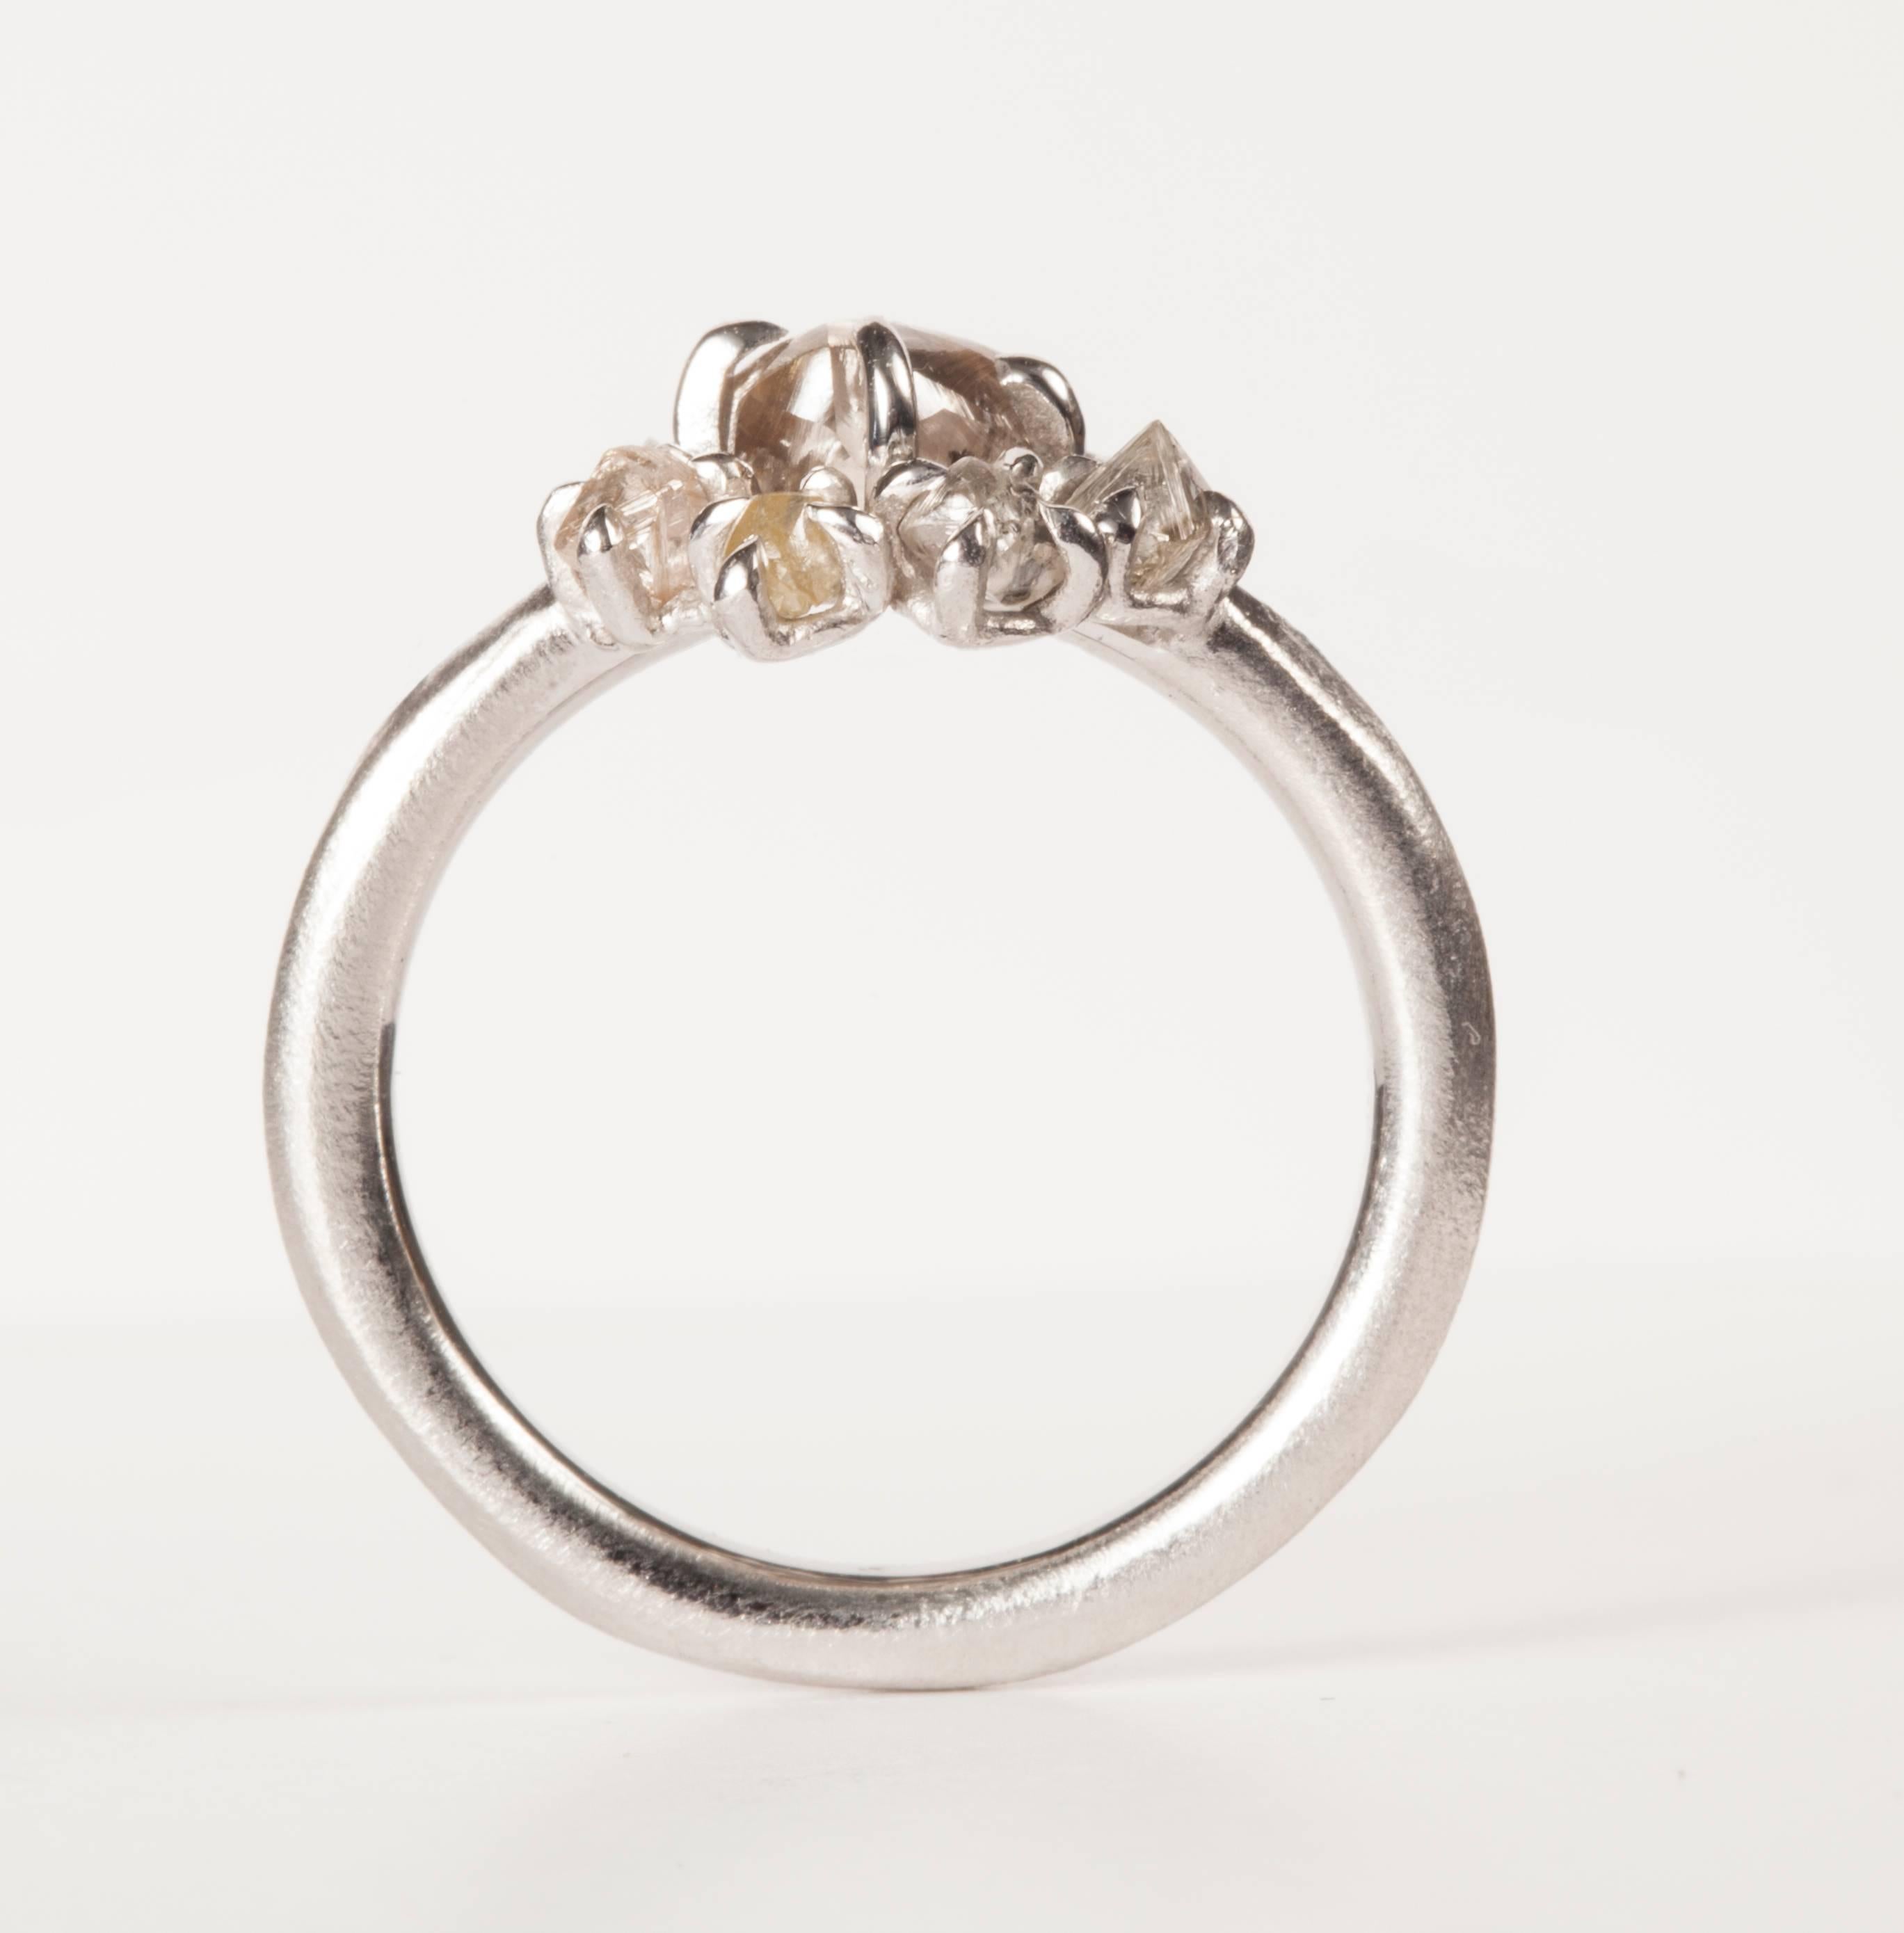 1.06 ct. Natural Light Brown and 1.23 ct. Natural Whitish Rough diamonds in 14K handcrafted white gold ring.

Every rough diamond from Roughdiamonds dk has been personally handpicked by Maya Bjørnsten. The diamonds we reject are sent back to be cut